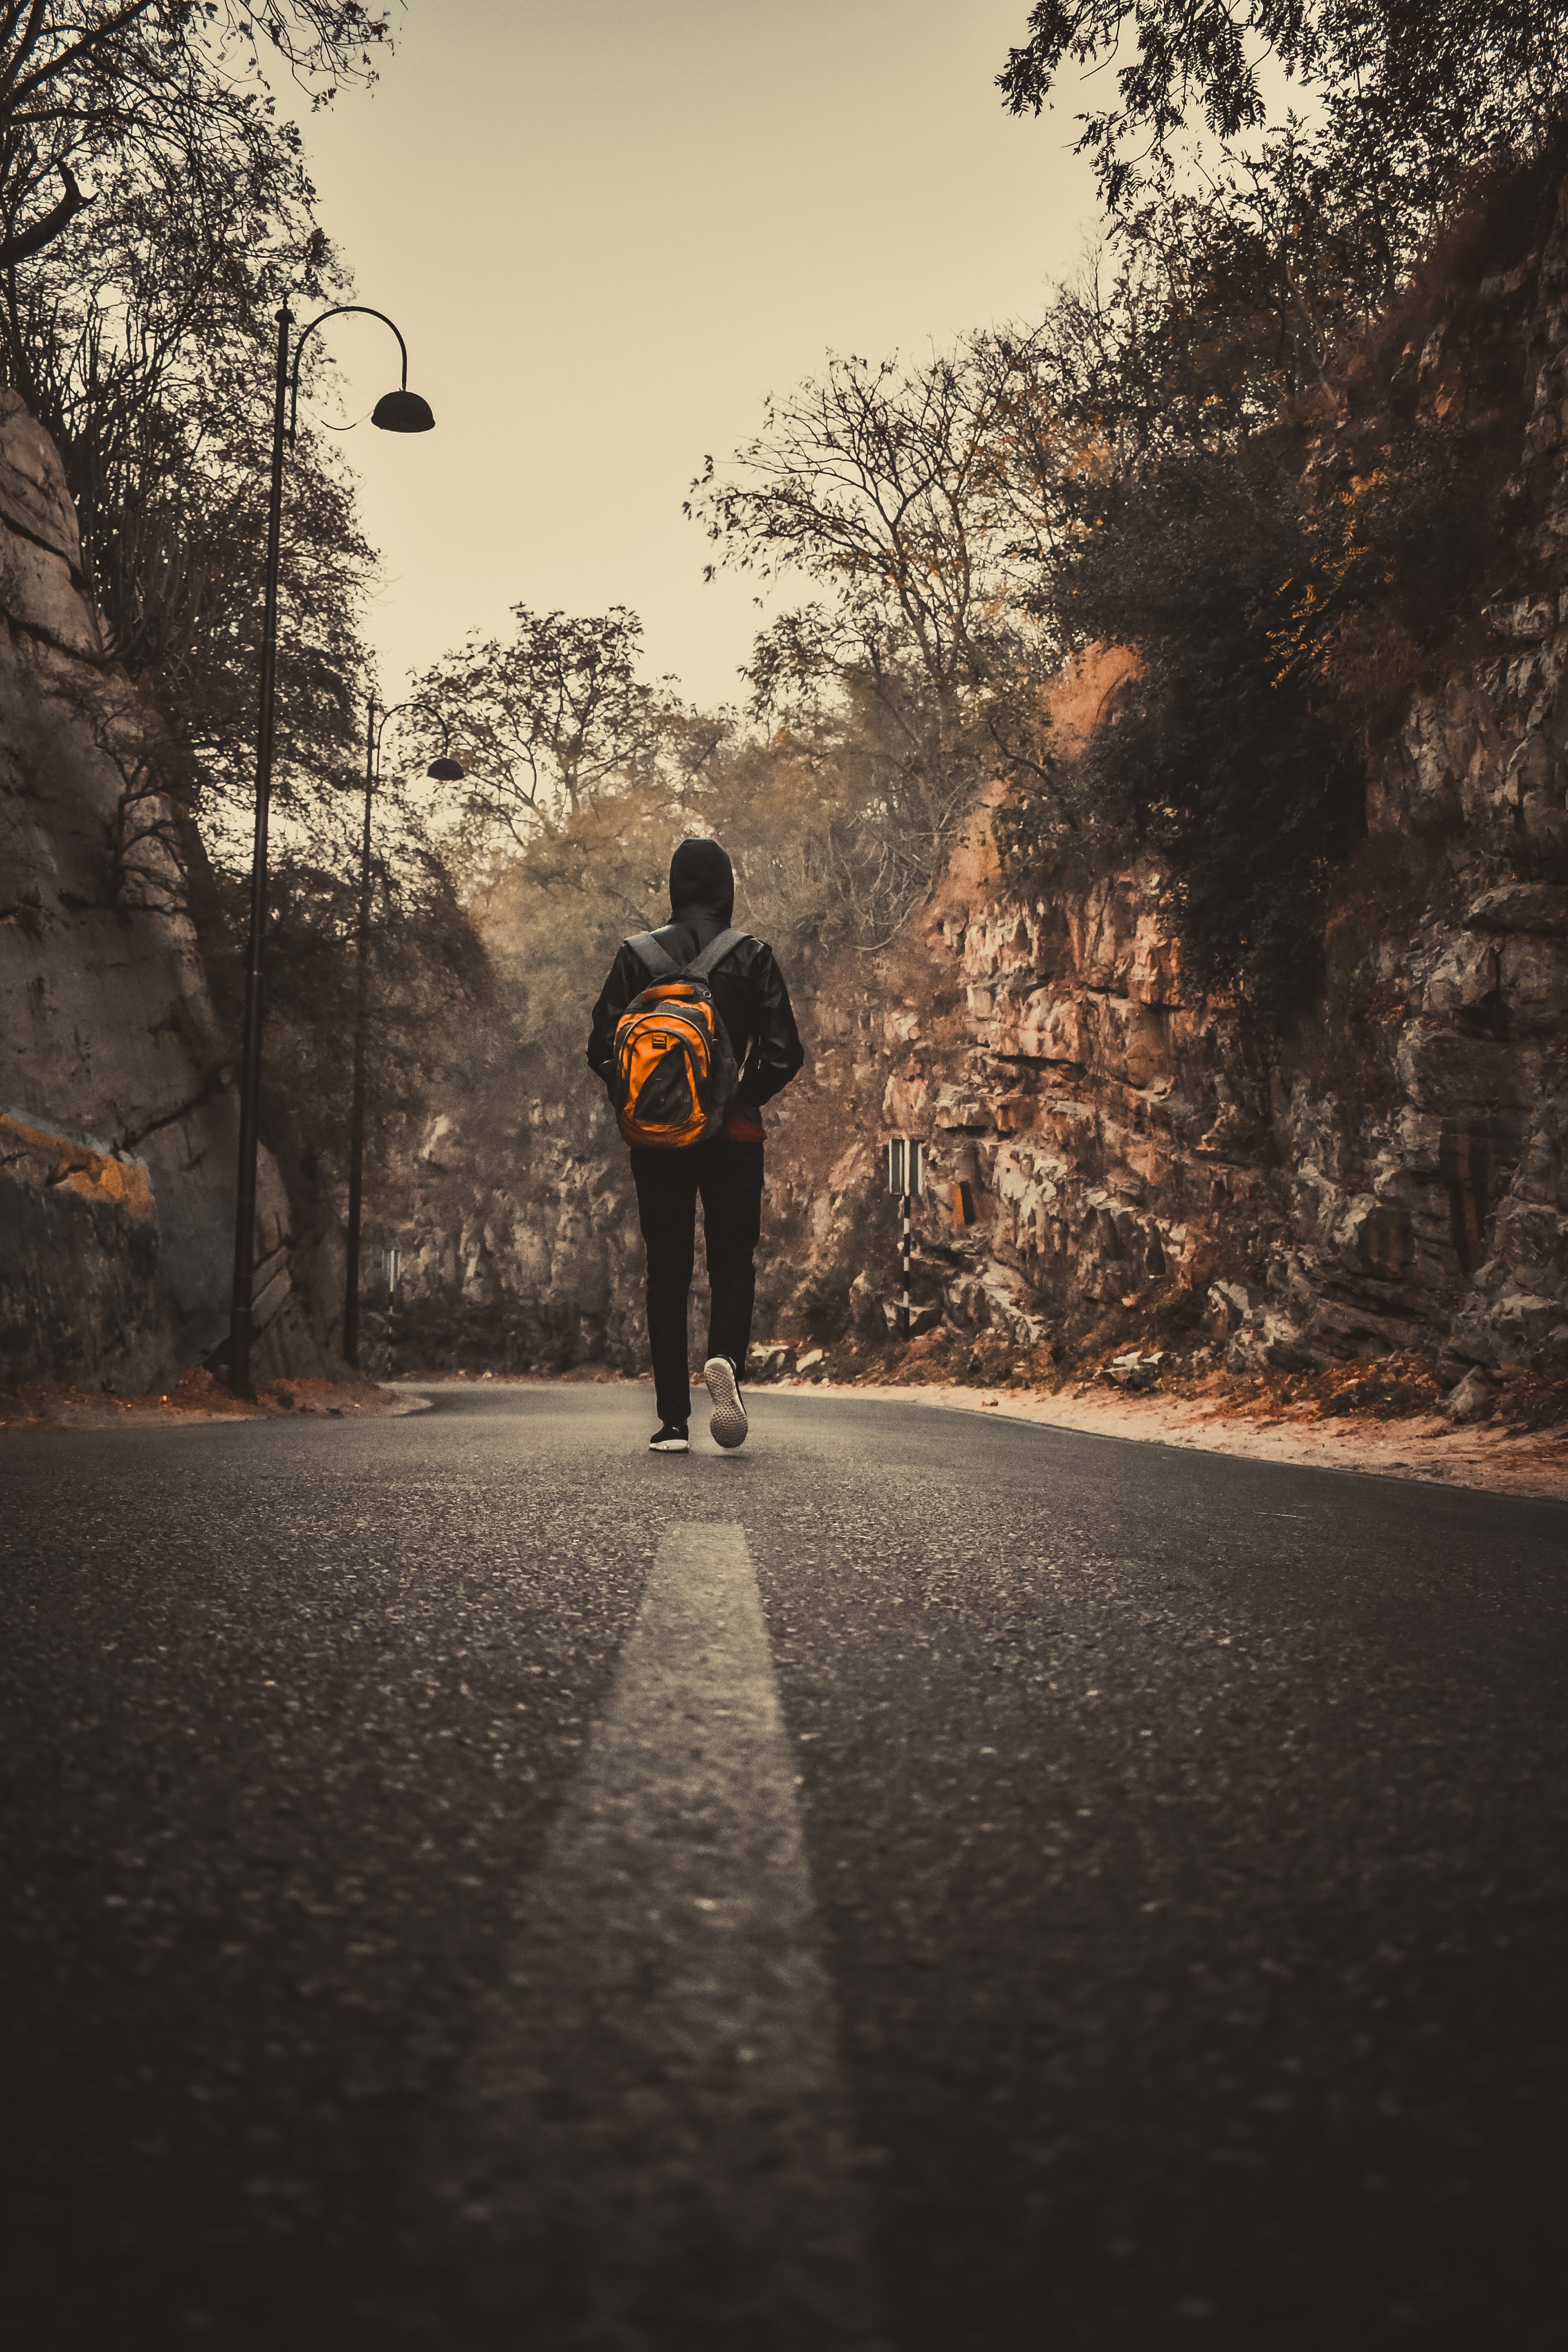 alone, sadness, sorrow, backpack, miscellanea, miscellaneous, road, loneliness, lonely, rucksack 1080p